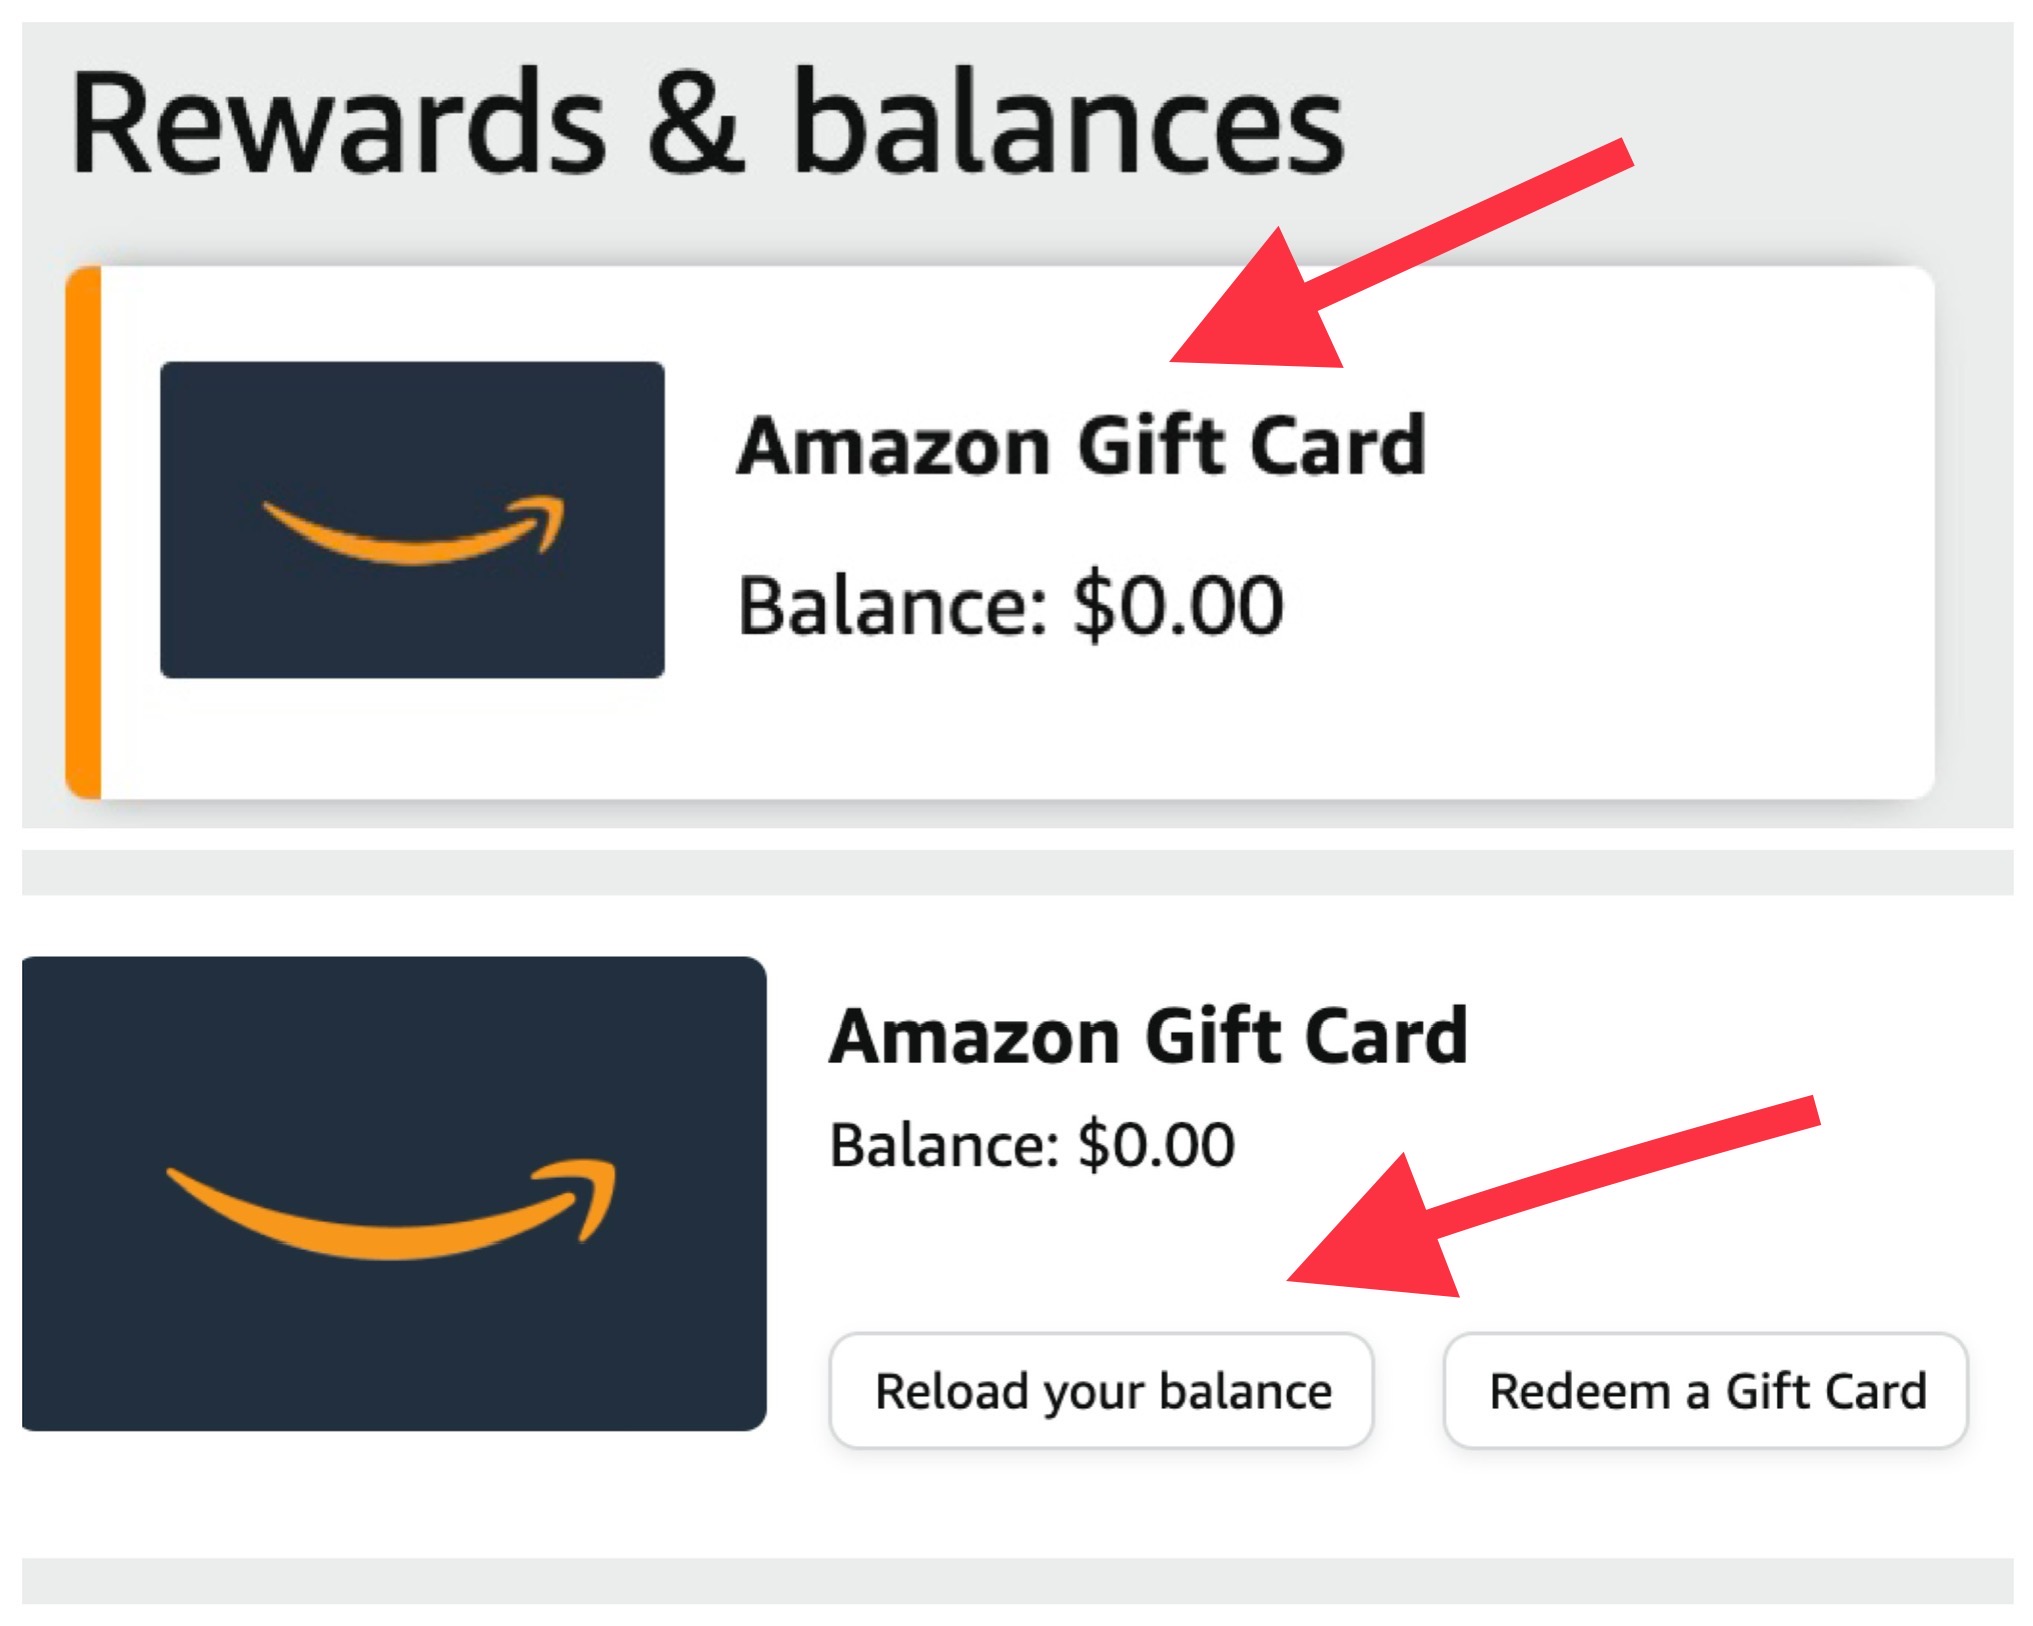 New Amazon Prime Cardholder Perk - $200 Gift Card | The Military Wallet